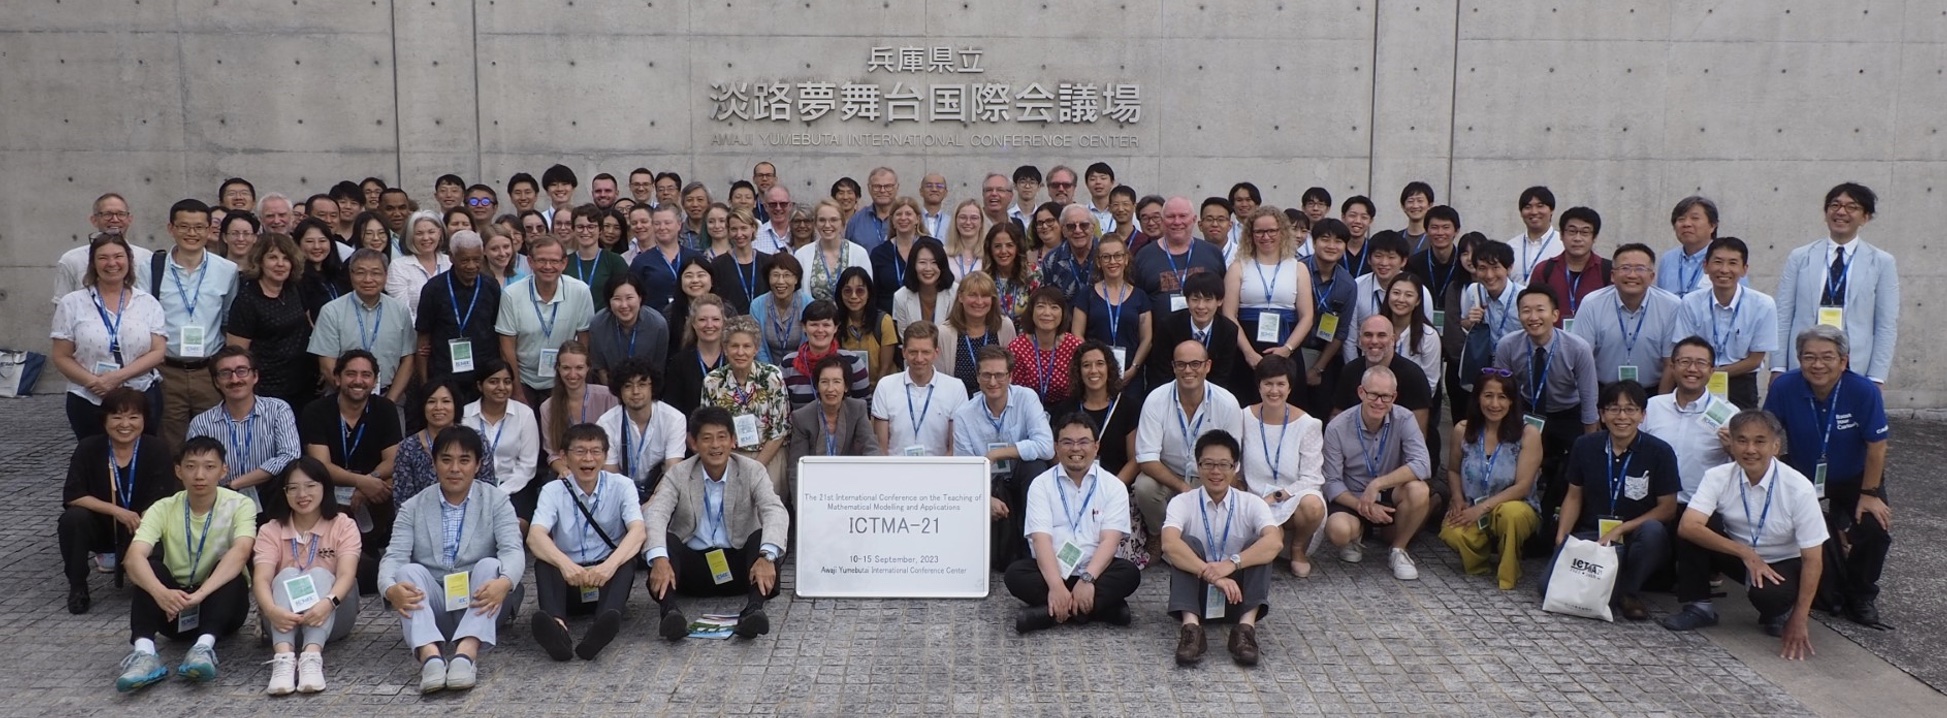 Group Photo of all ICTMA21 Participants.jpg